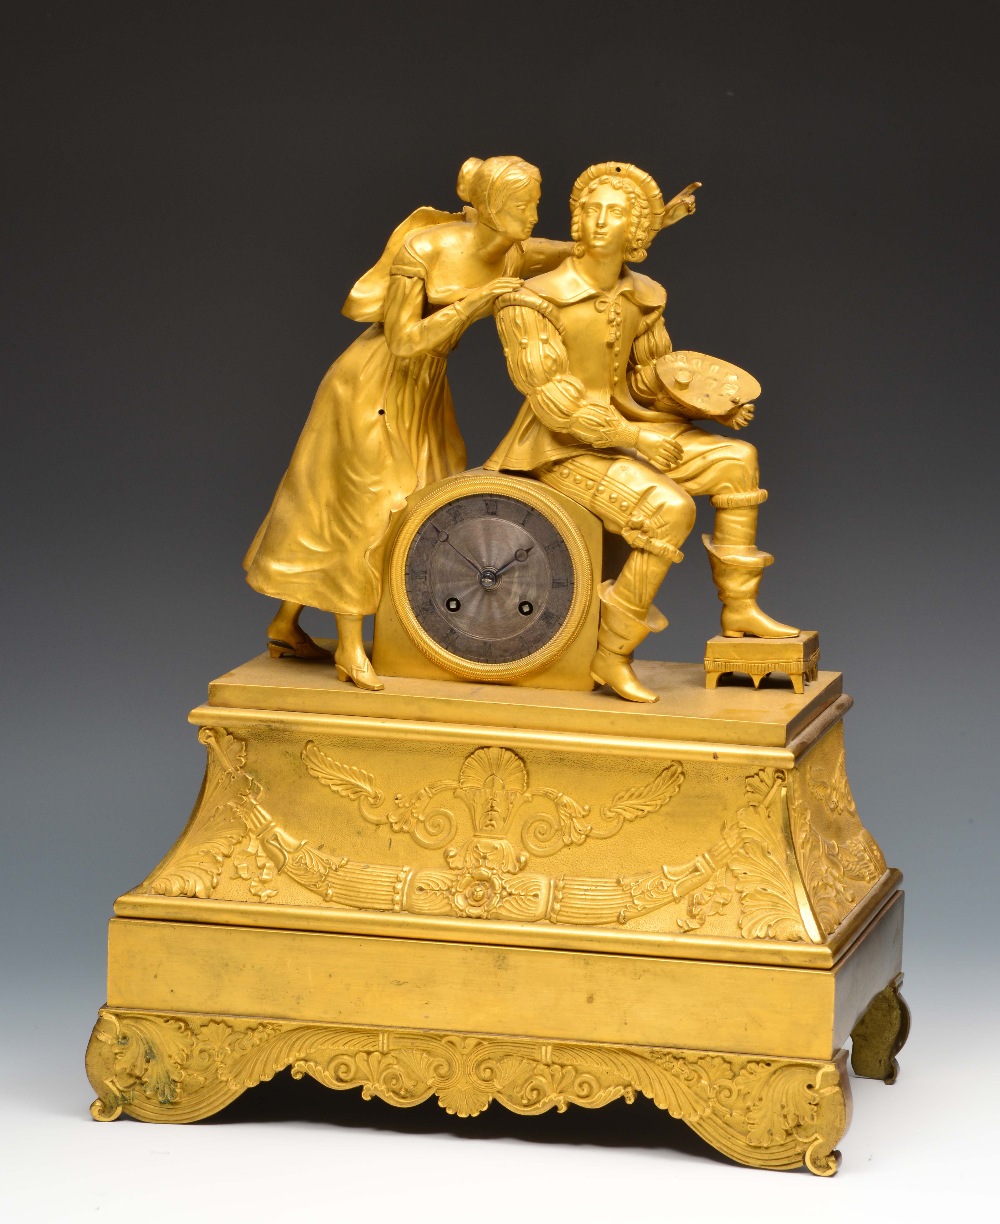 A French Restoration period ormolu mantel clock with engine turned silvered Roman dial, the twin